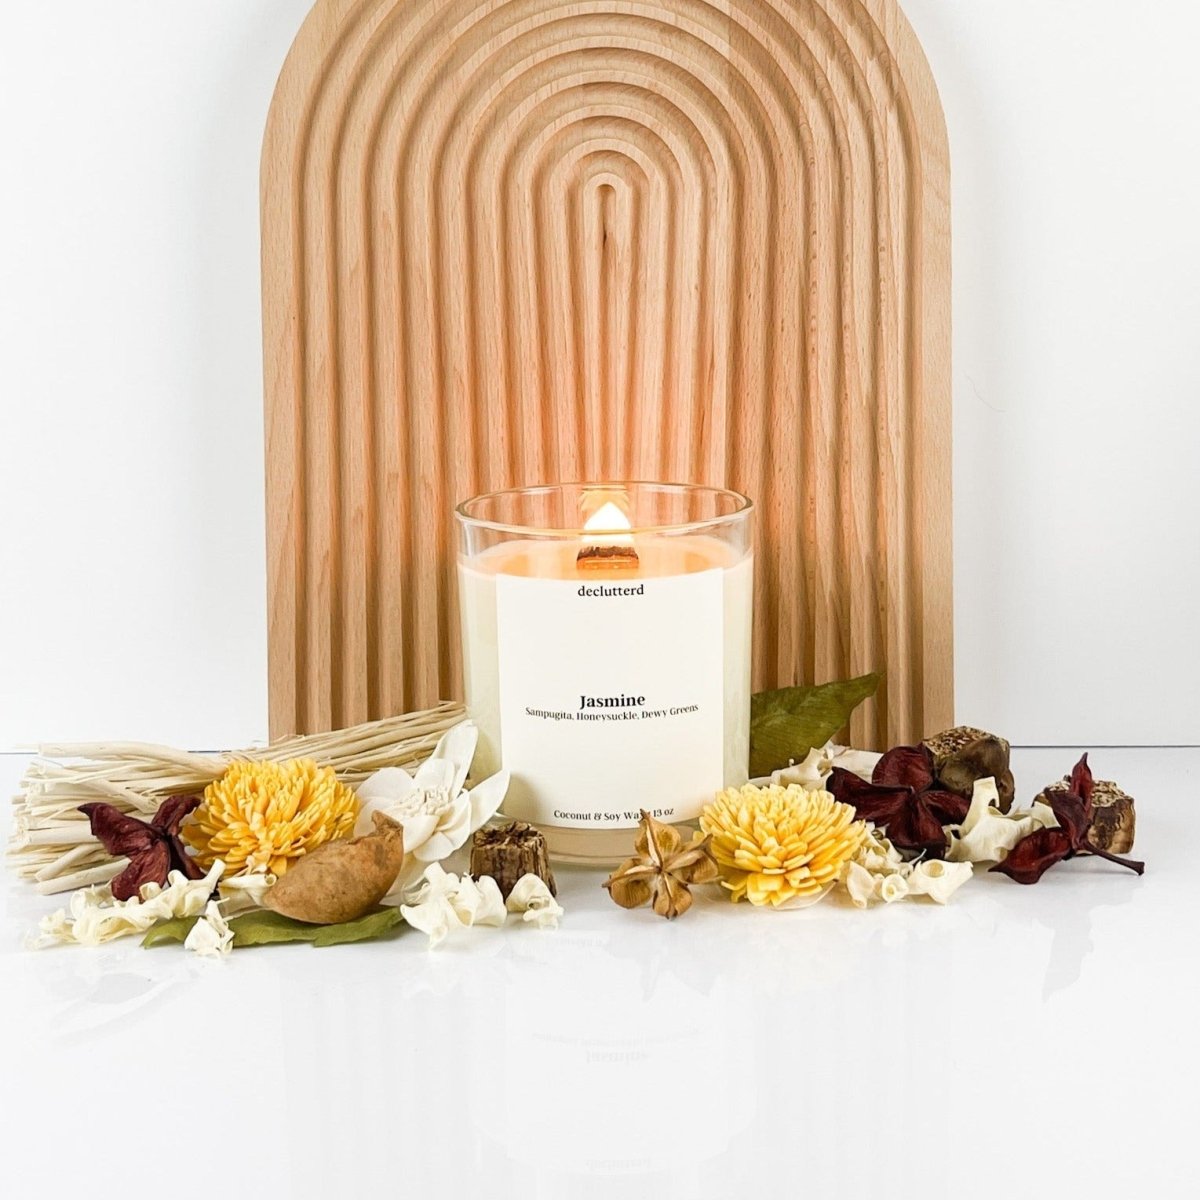 declutterd Jasmine Wood Wick Candle - lily & onyx